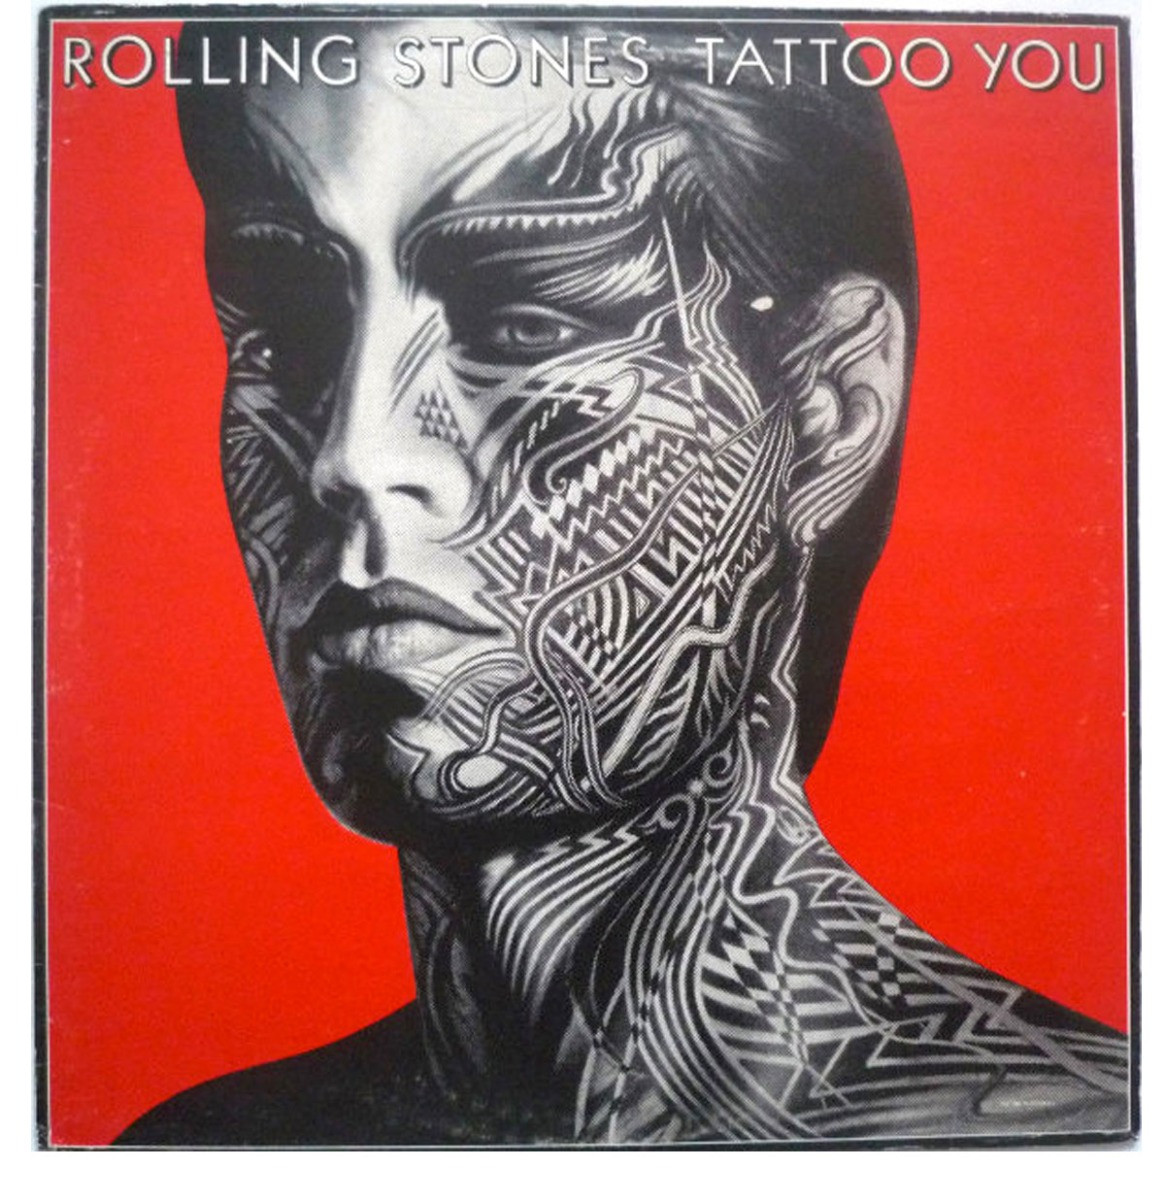 Rolling Stones Tattoo You LP